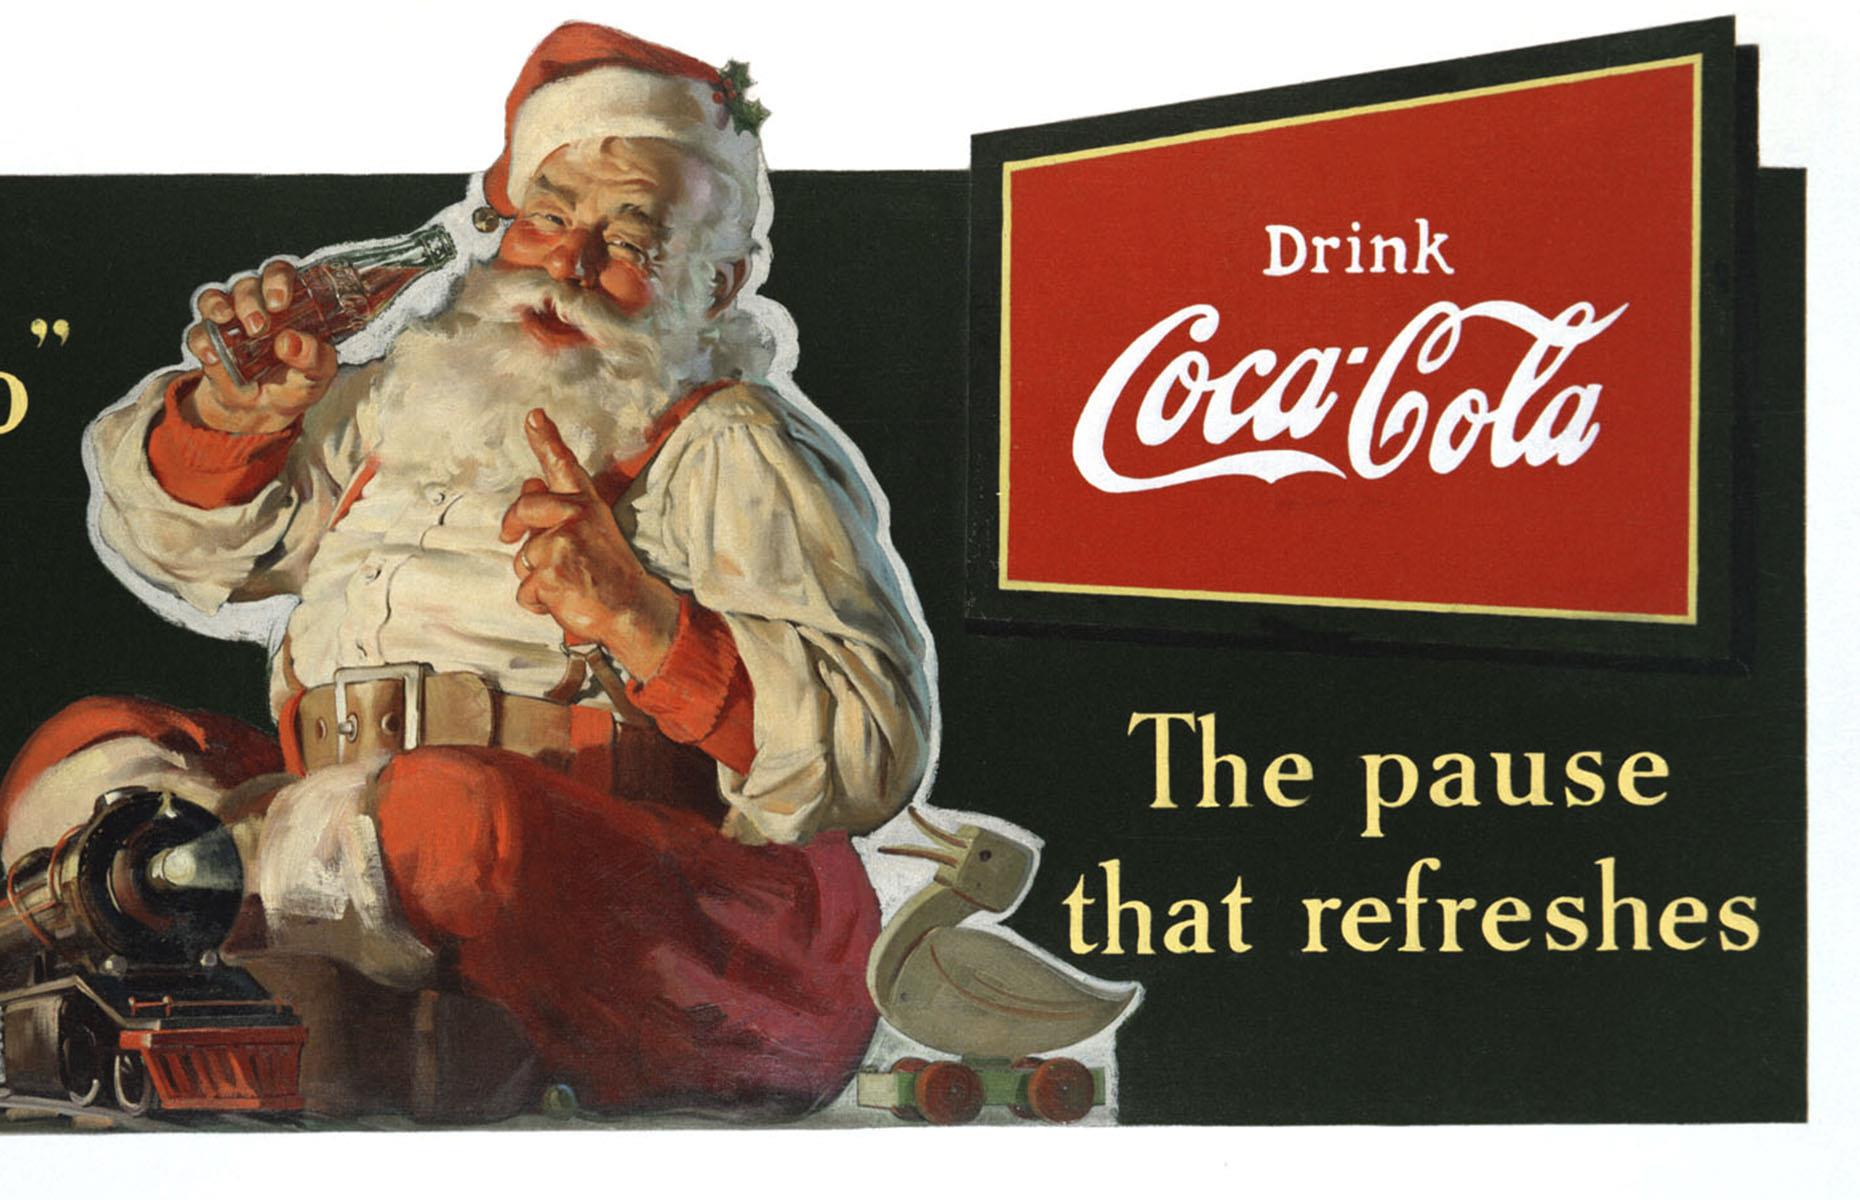 <p>With Coca-Cola available nationwide and Prohibition keeping bars closed, it rapidly became an American staple. Advertising only boosted its popularity. The first popular slogan, demonstrated here in a 1936 Christmas advert, was "The pause that refreshes", coined by ad man Archie Lee in 1929. The "pause" is still synonymous with Coca-Cola today.</p>  <p><strong><a href="https://www.lovefood.com/gallerylist/67980/cocacola-flavours-from-around-the-world">Take a look at these Coca-Cola flavors from around the world</a></strong></p>